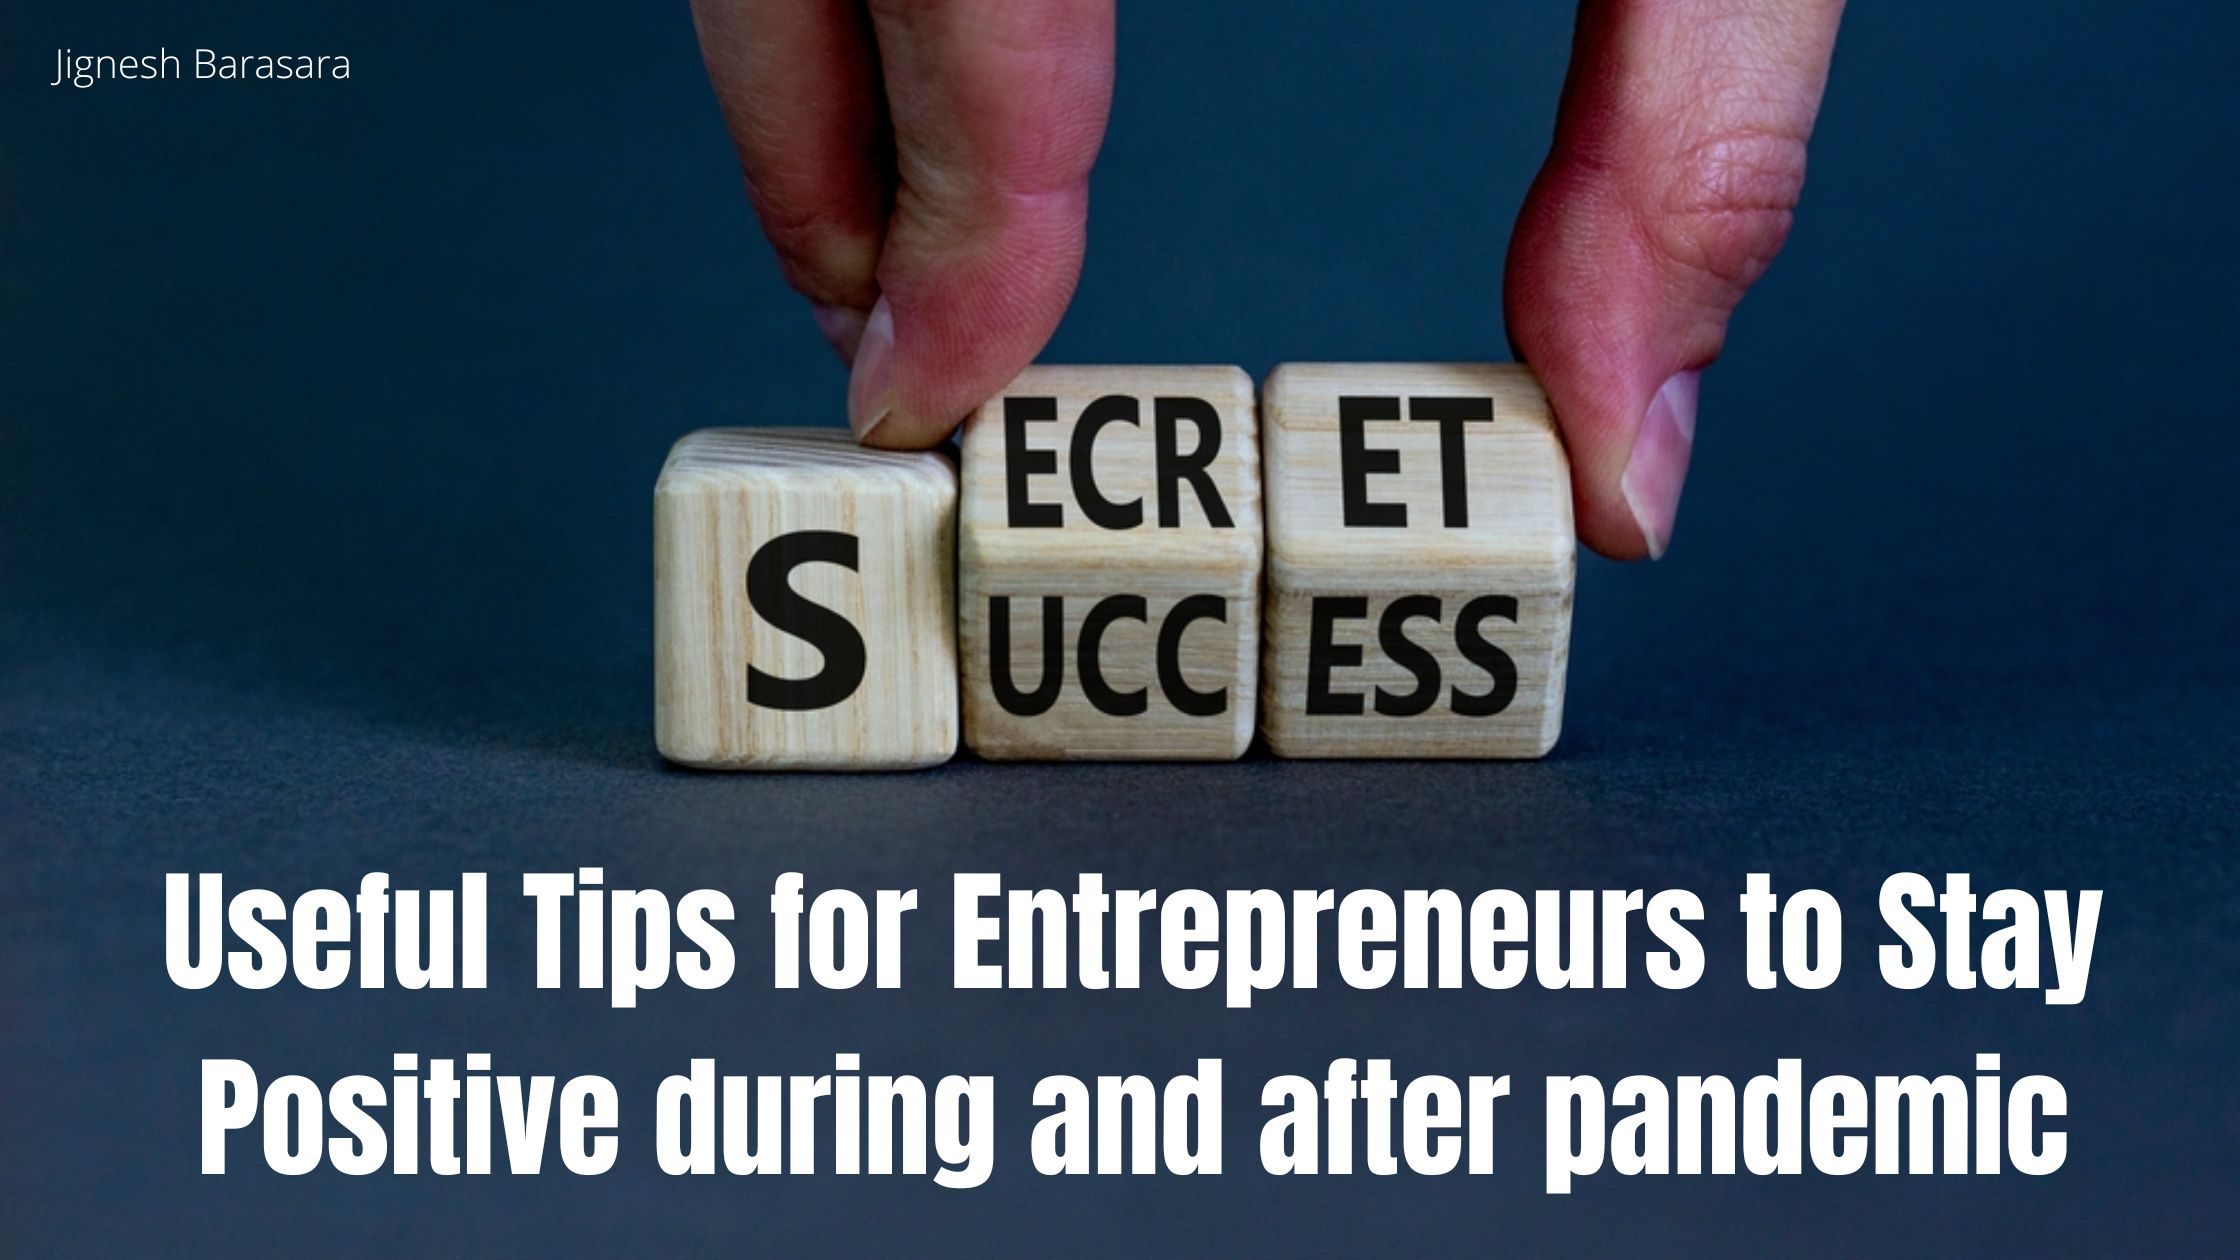 Useful Tips for Entrepreneurs to Stay Positive during and after pandemic